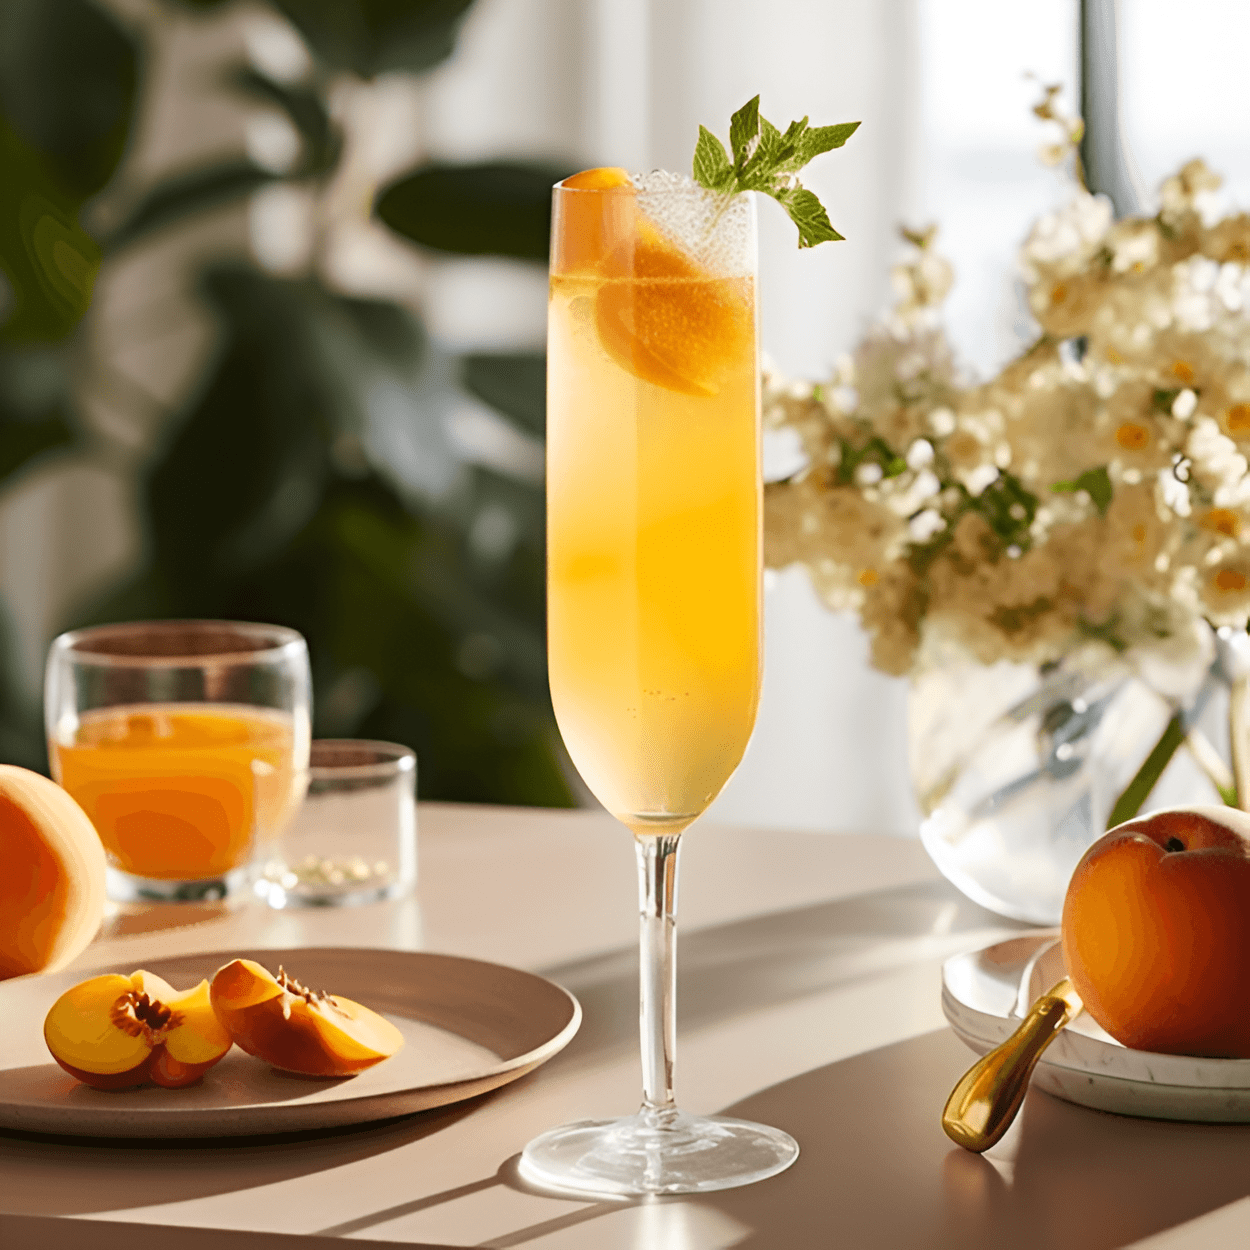 Apricot Bliss Cocktail Recipe - The Apricot Bliss is a sweet, fruity cocktail with a hint of tartness from the lemon juice. The apricot brandy gives it a rich, deep flavor that is balanced by the lightness of the champagne. It's a refreshing, bubbly cocktail that is perfect for a hot summer day.